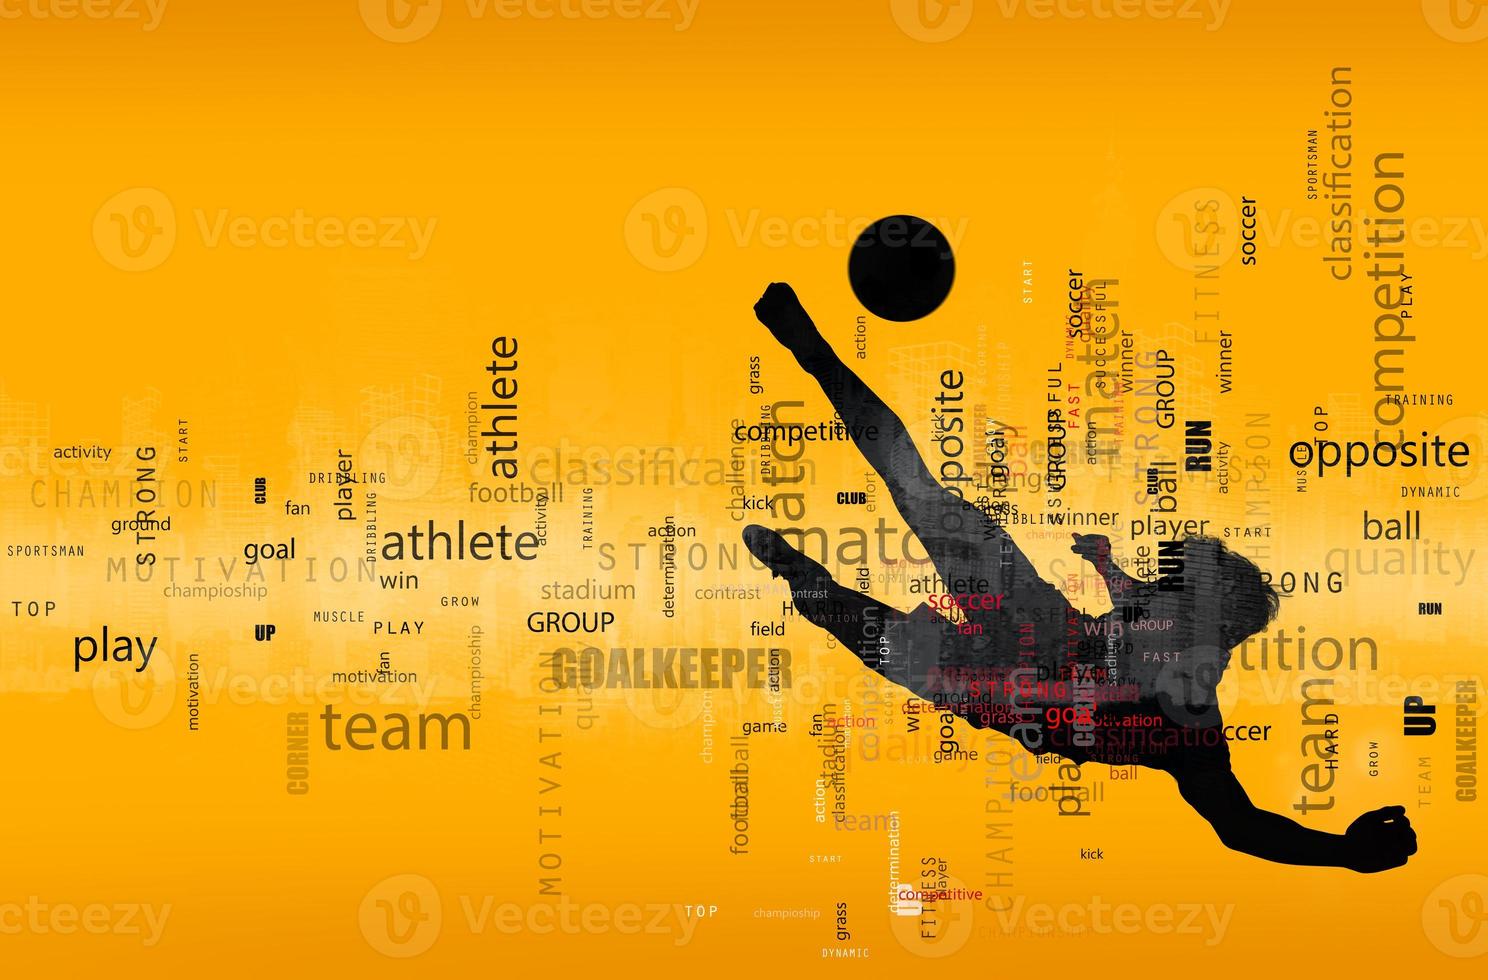 Football scene of a soccer player silhouette in action. Text effect in overlay with the most used terms. Abstract background photo